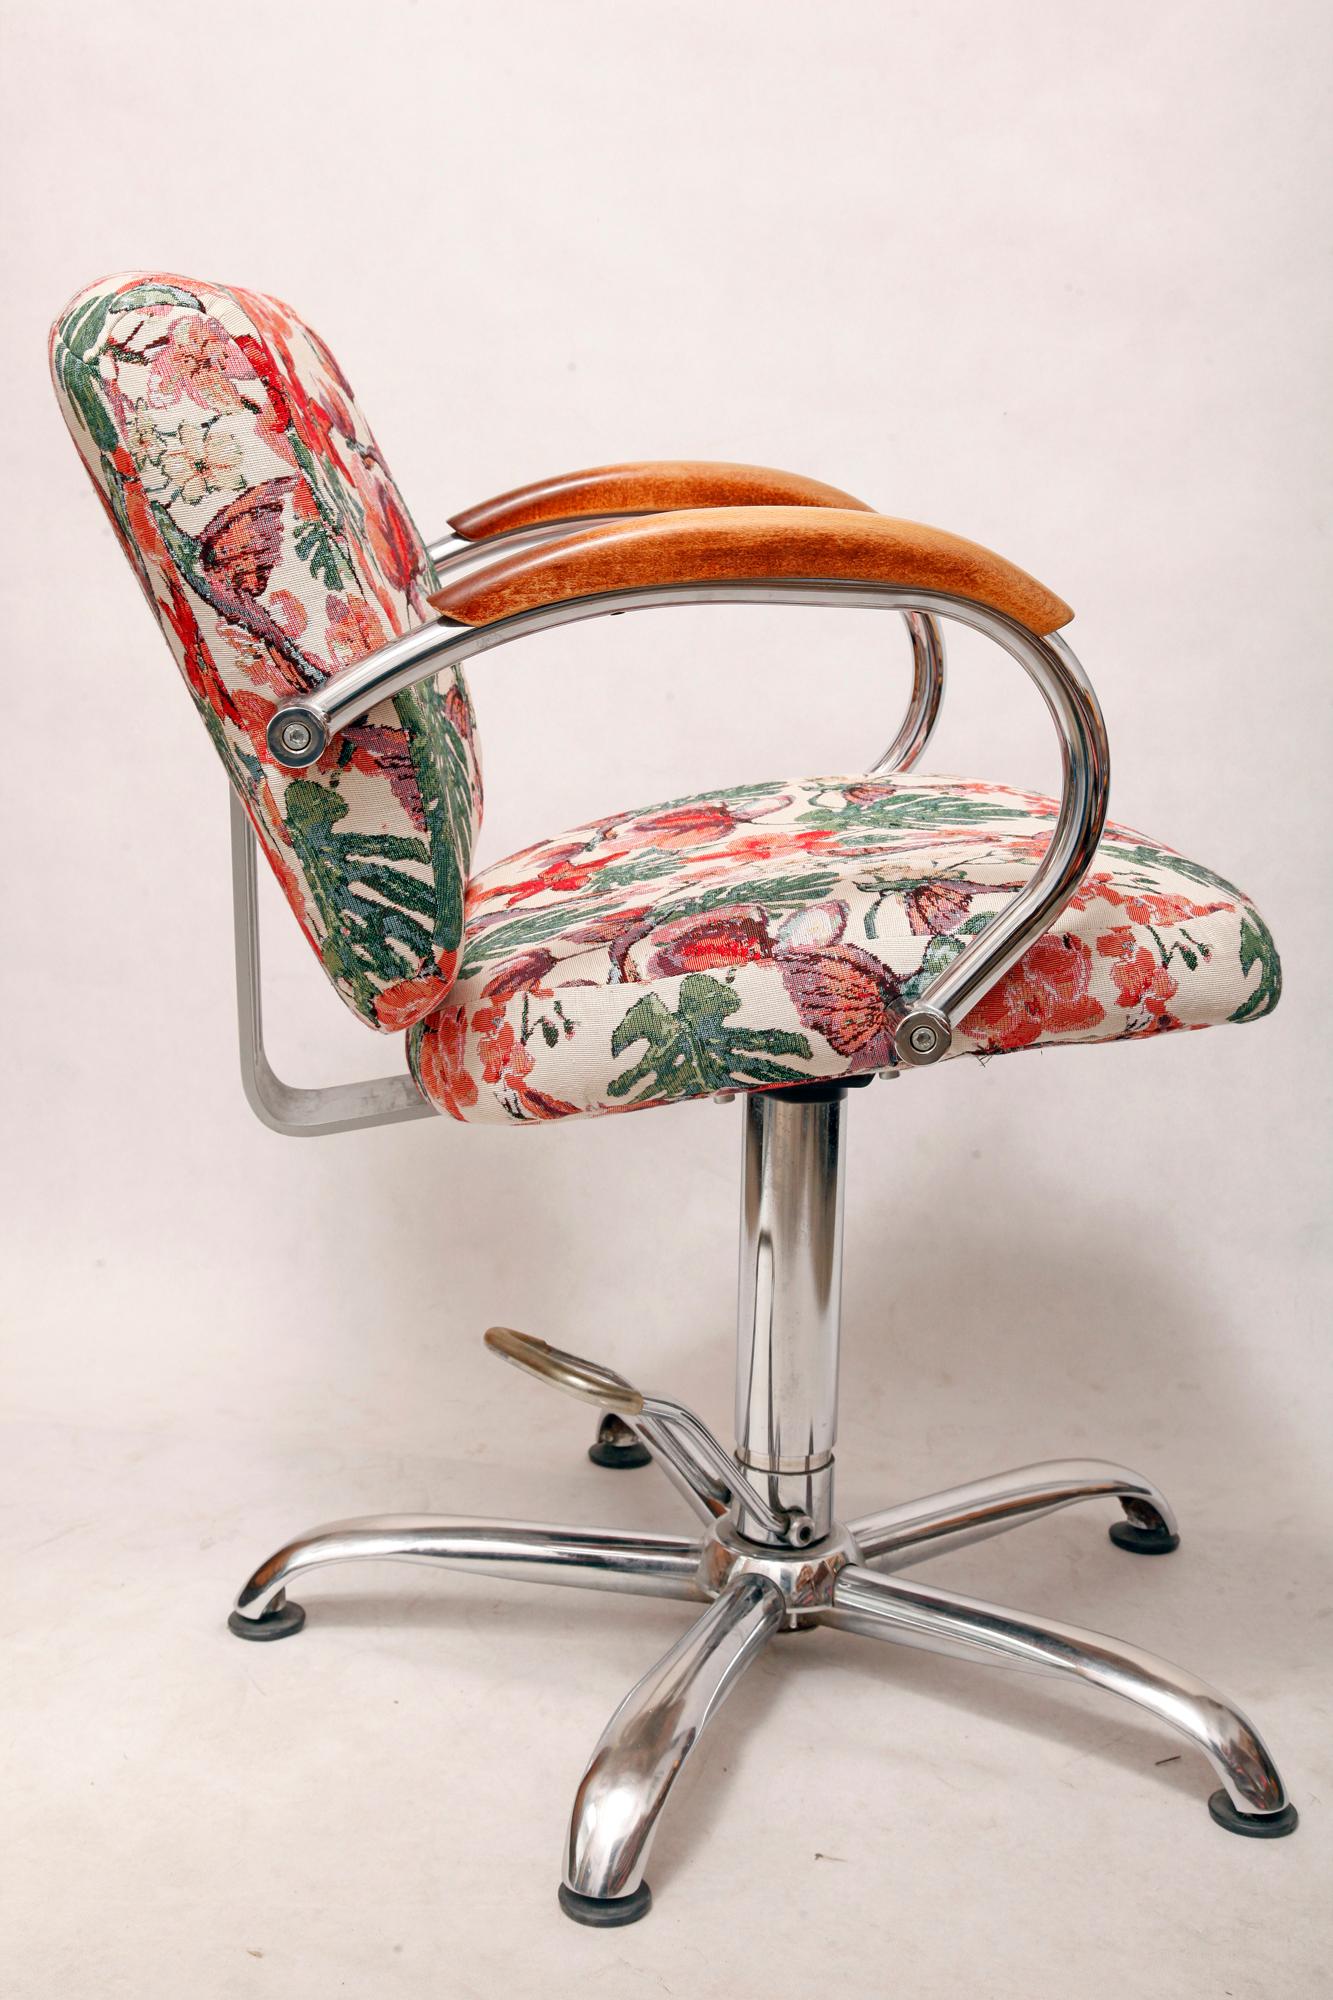 Hand-Crafted Elegant, Rotating Hairdressing Chair in Colored Upholstery, Germany, 1980s For Sale